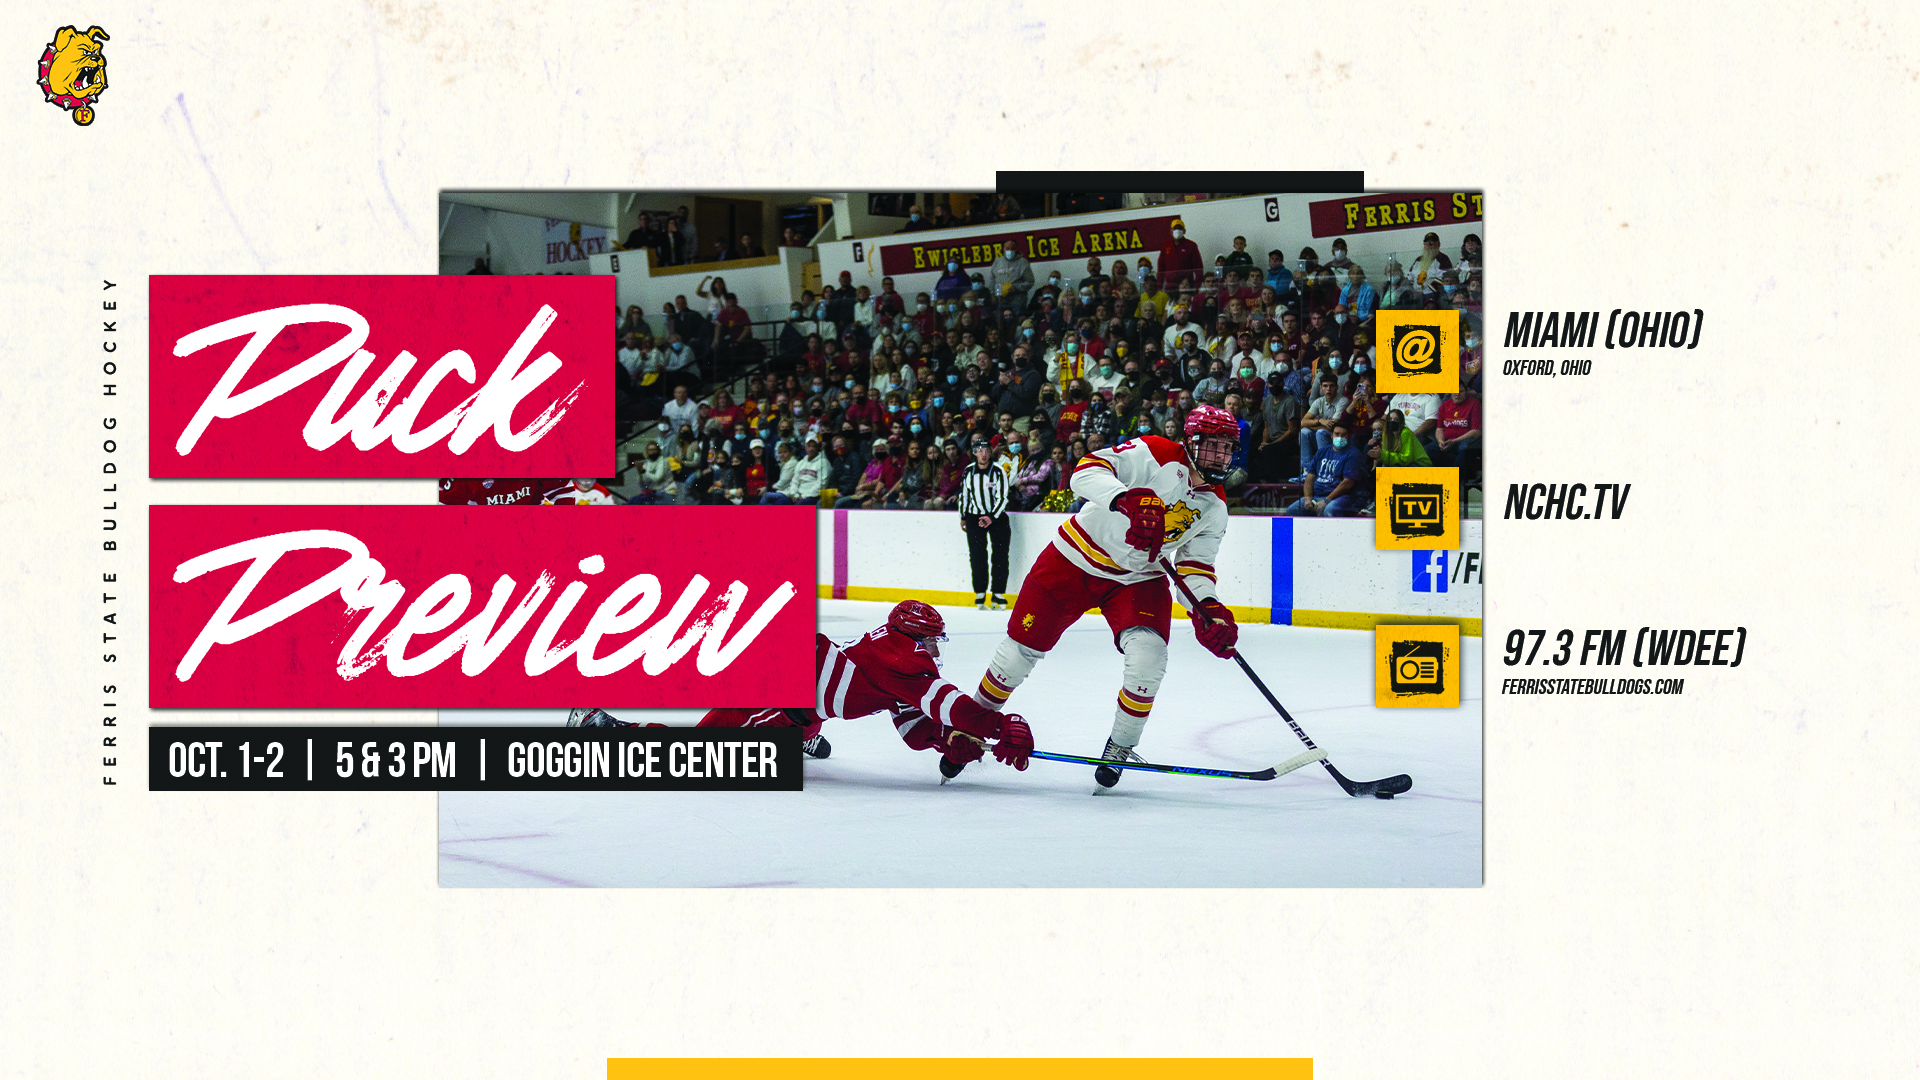 Puck Preview - Week 1 - Bulldogs Travel To Oxford to Open Season at Miami